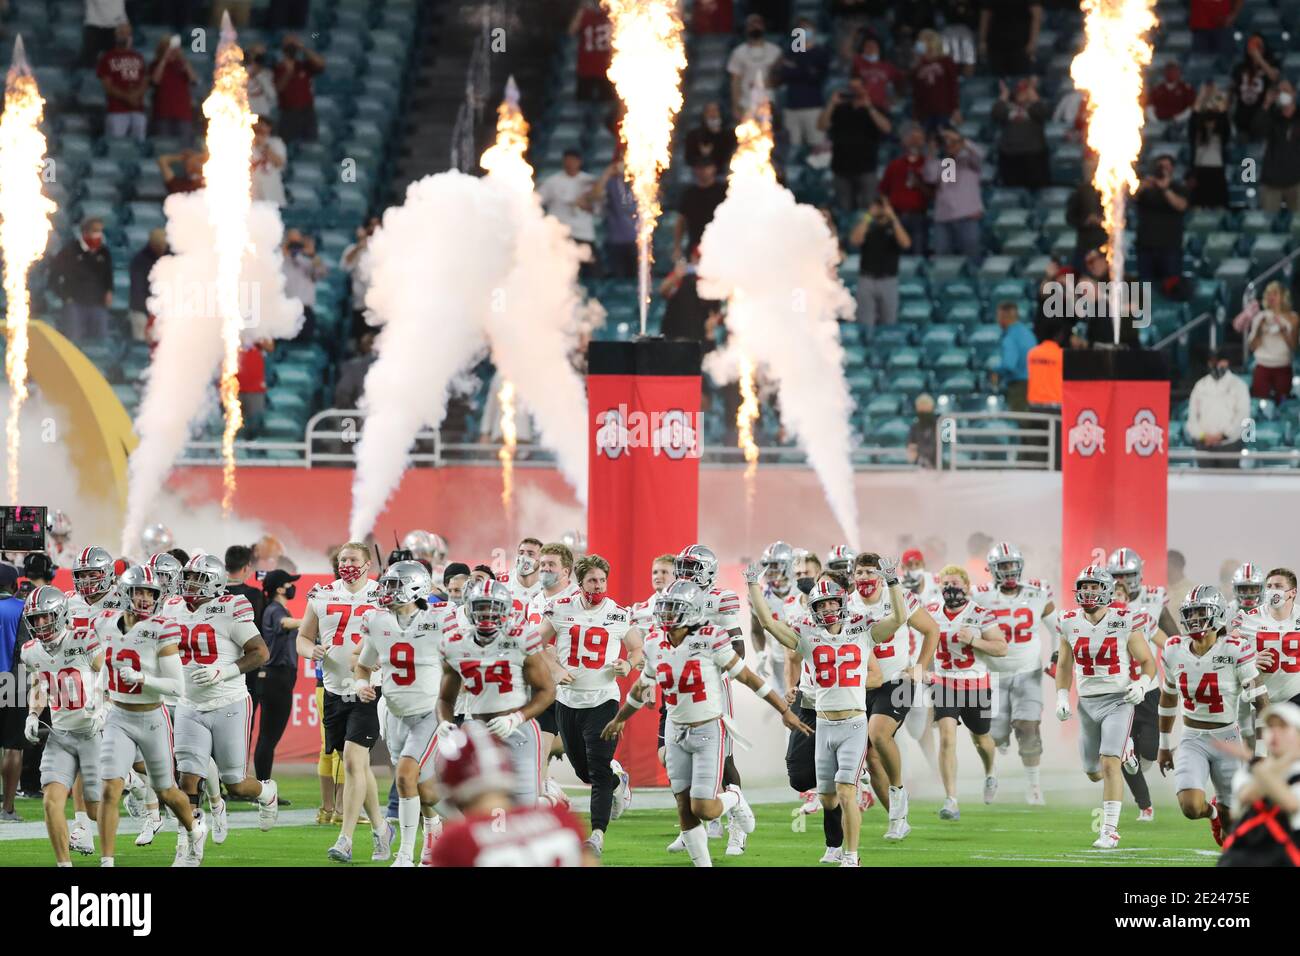 January 11, 2021: Ohio State takes the field during the College Football Playoff National Championship at Hard Rock Stadium in Miami Gardens, Florida. Credit: Cory Knowlton/ZUMA Wire/Alamy Live News Stock Photo